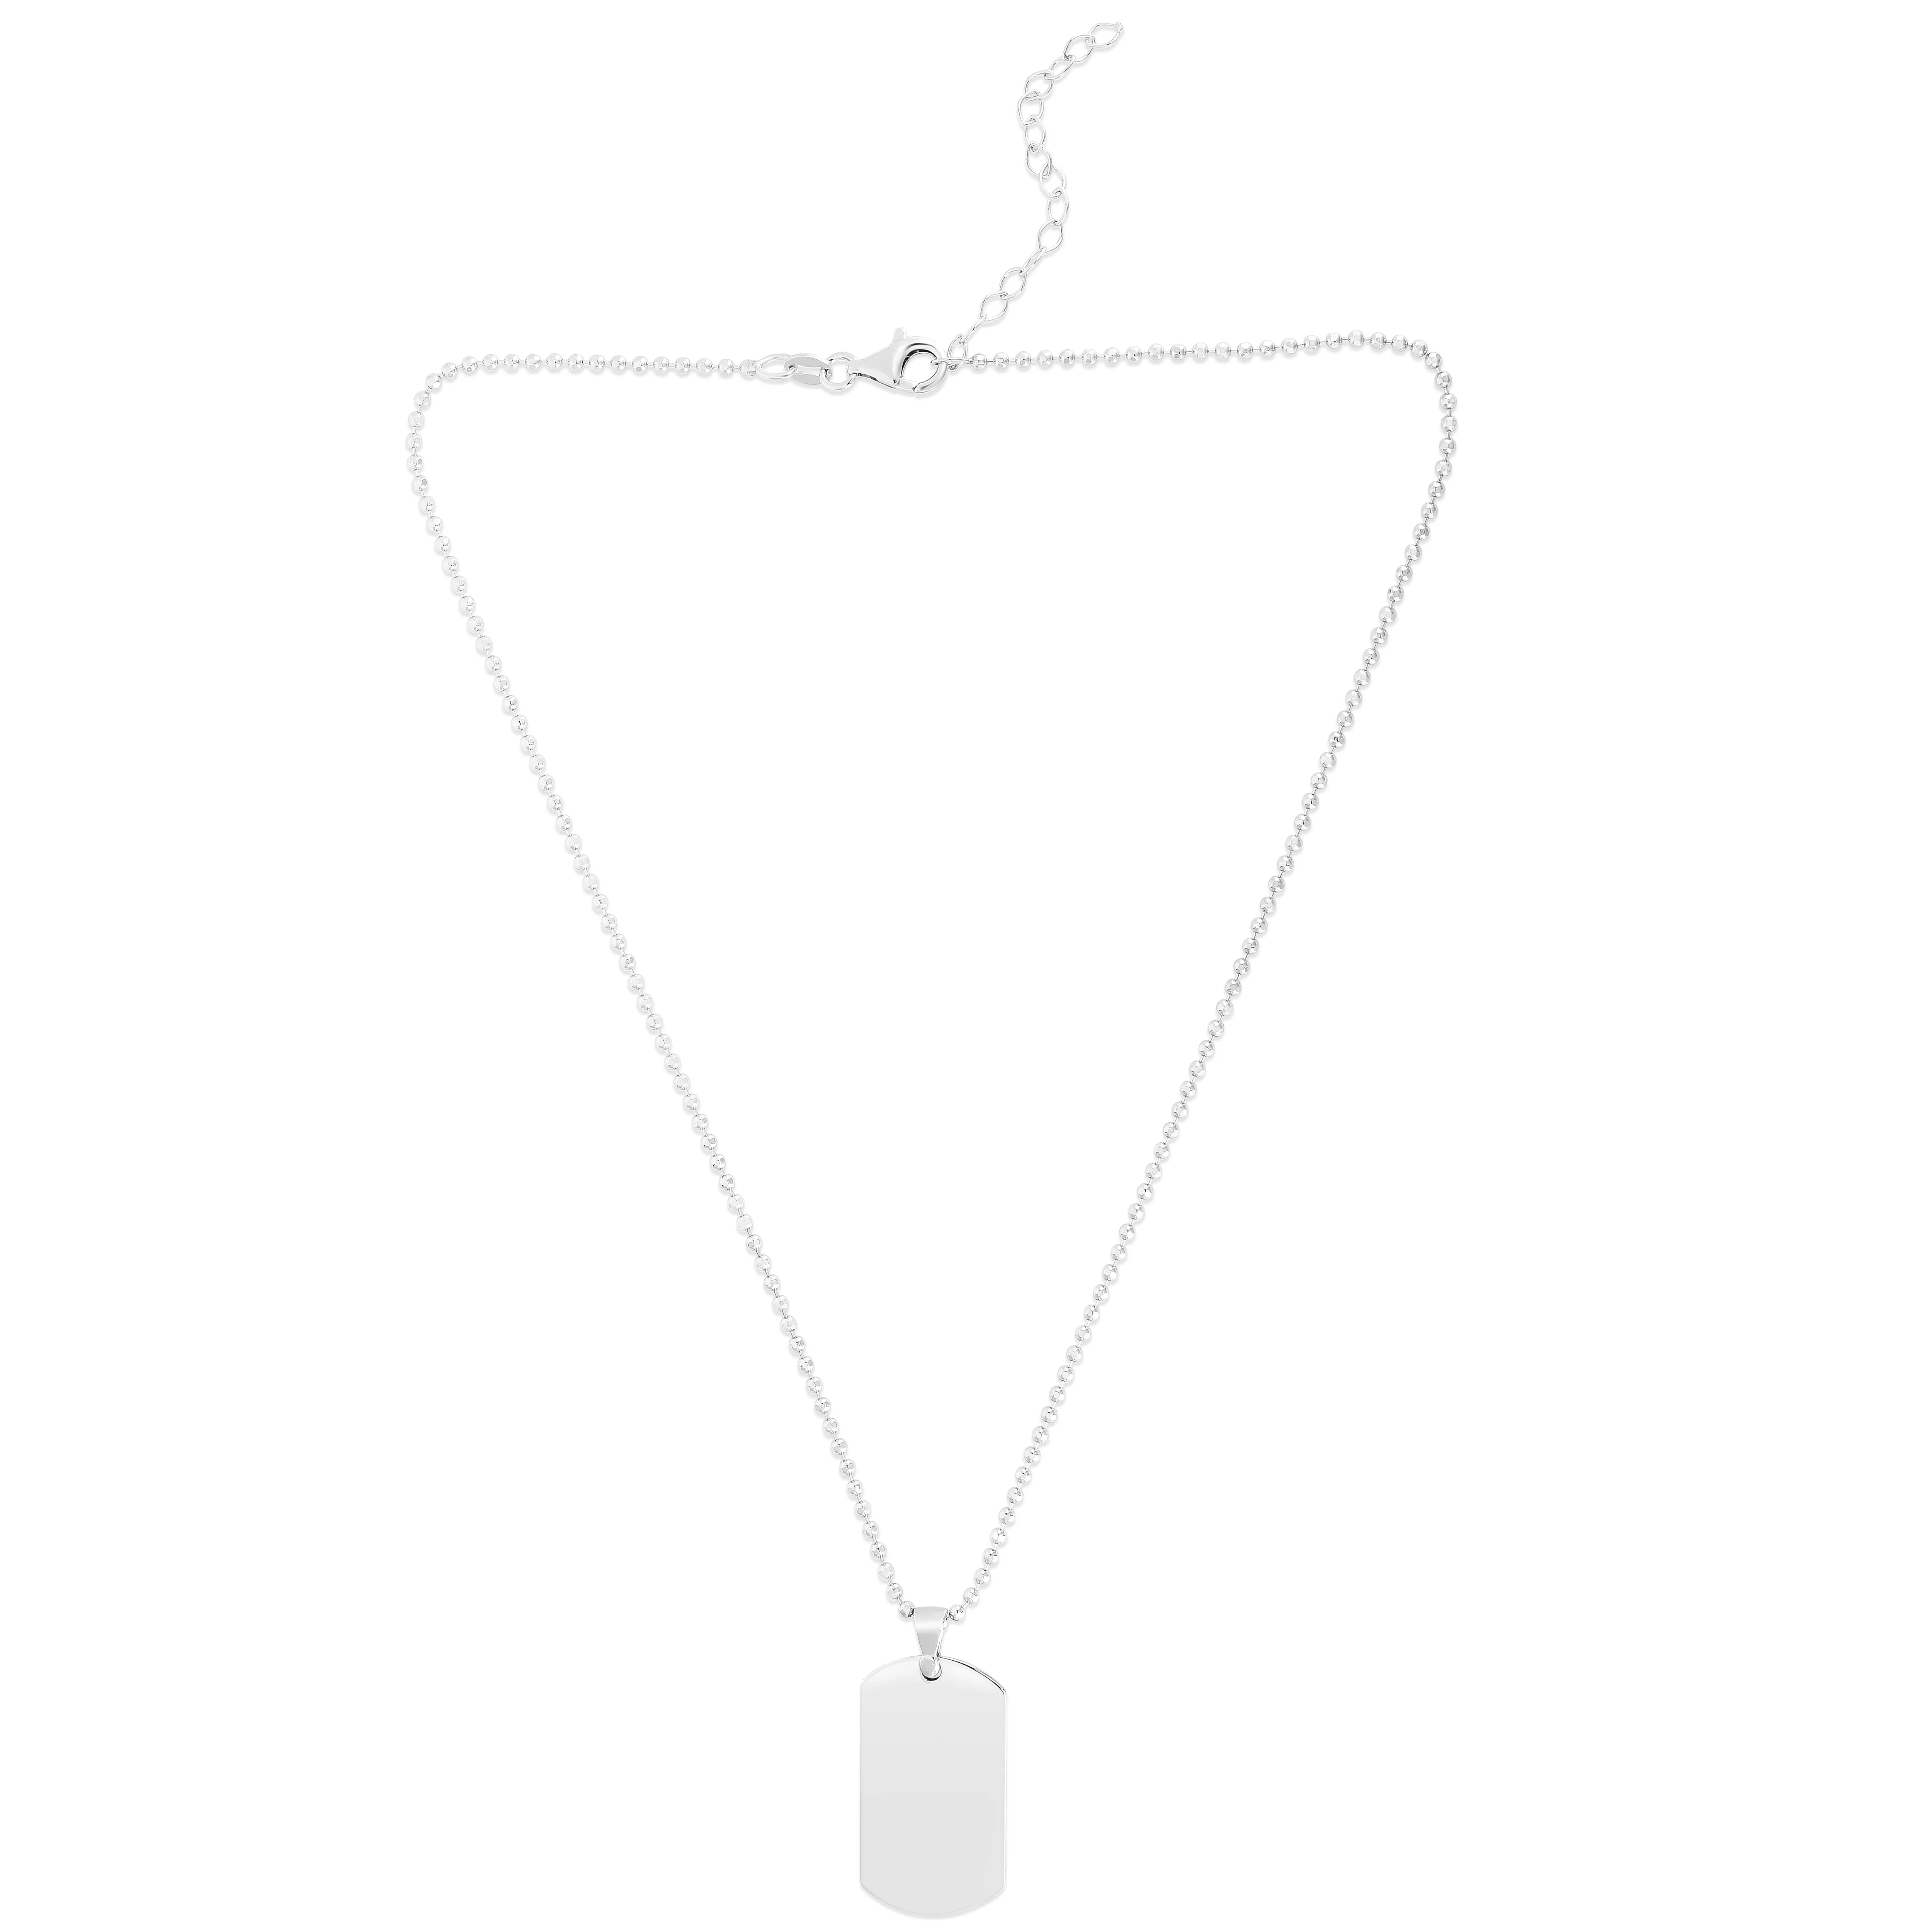 Silver Rectangular Tag Necklace